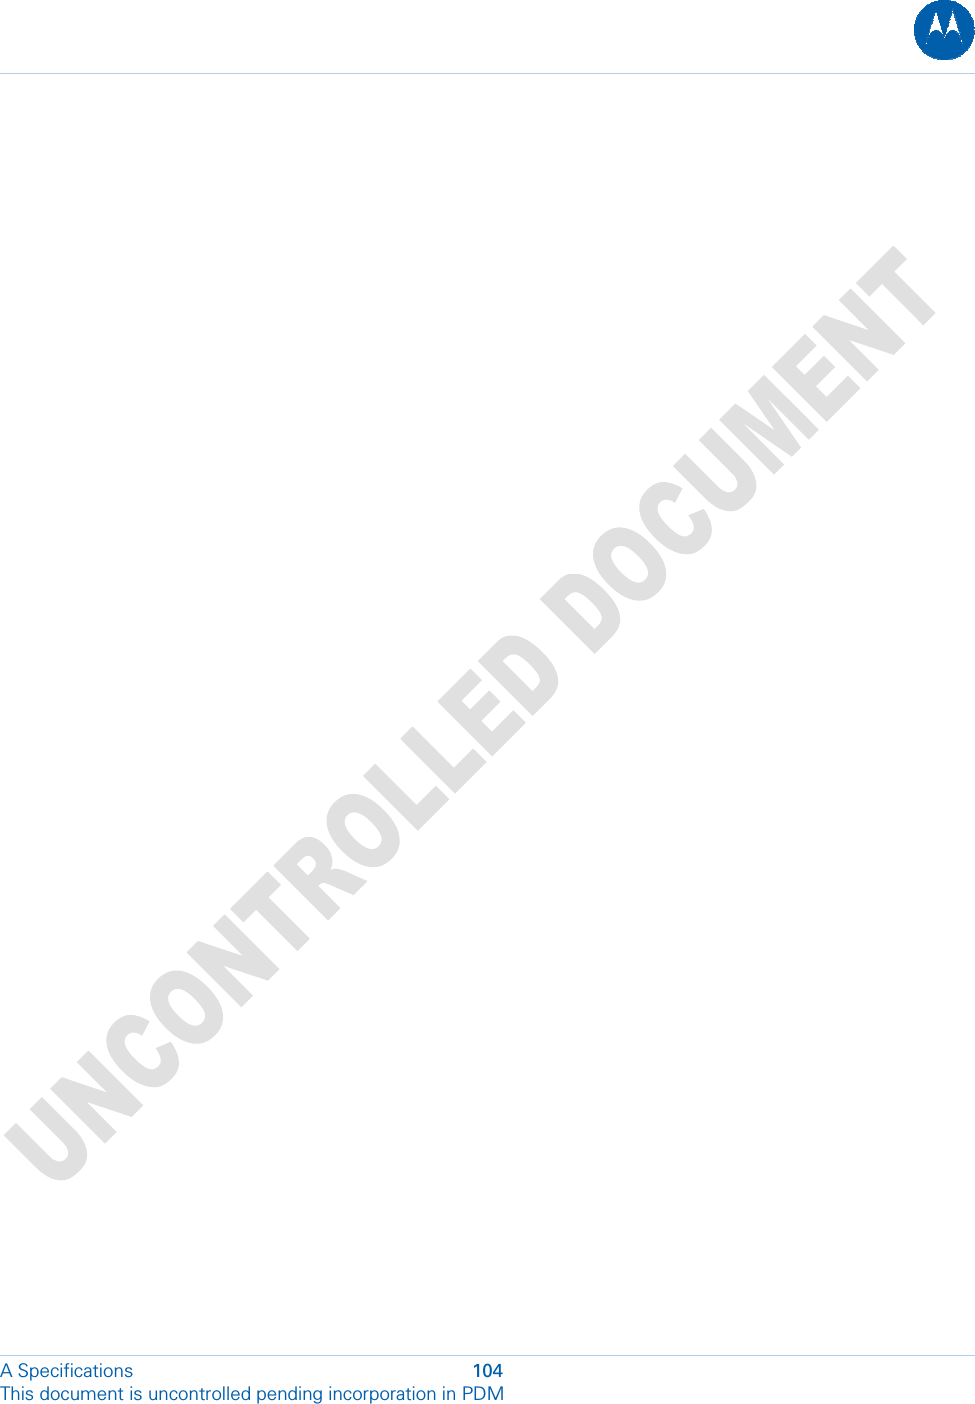   A Specifications  104 This document is uncontrolled pending incorporation in PDM  